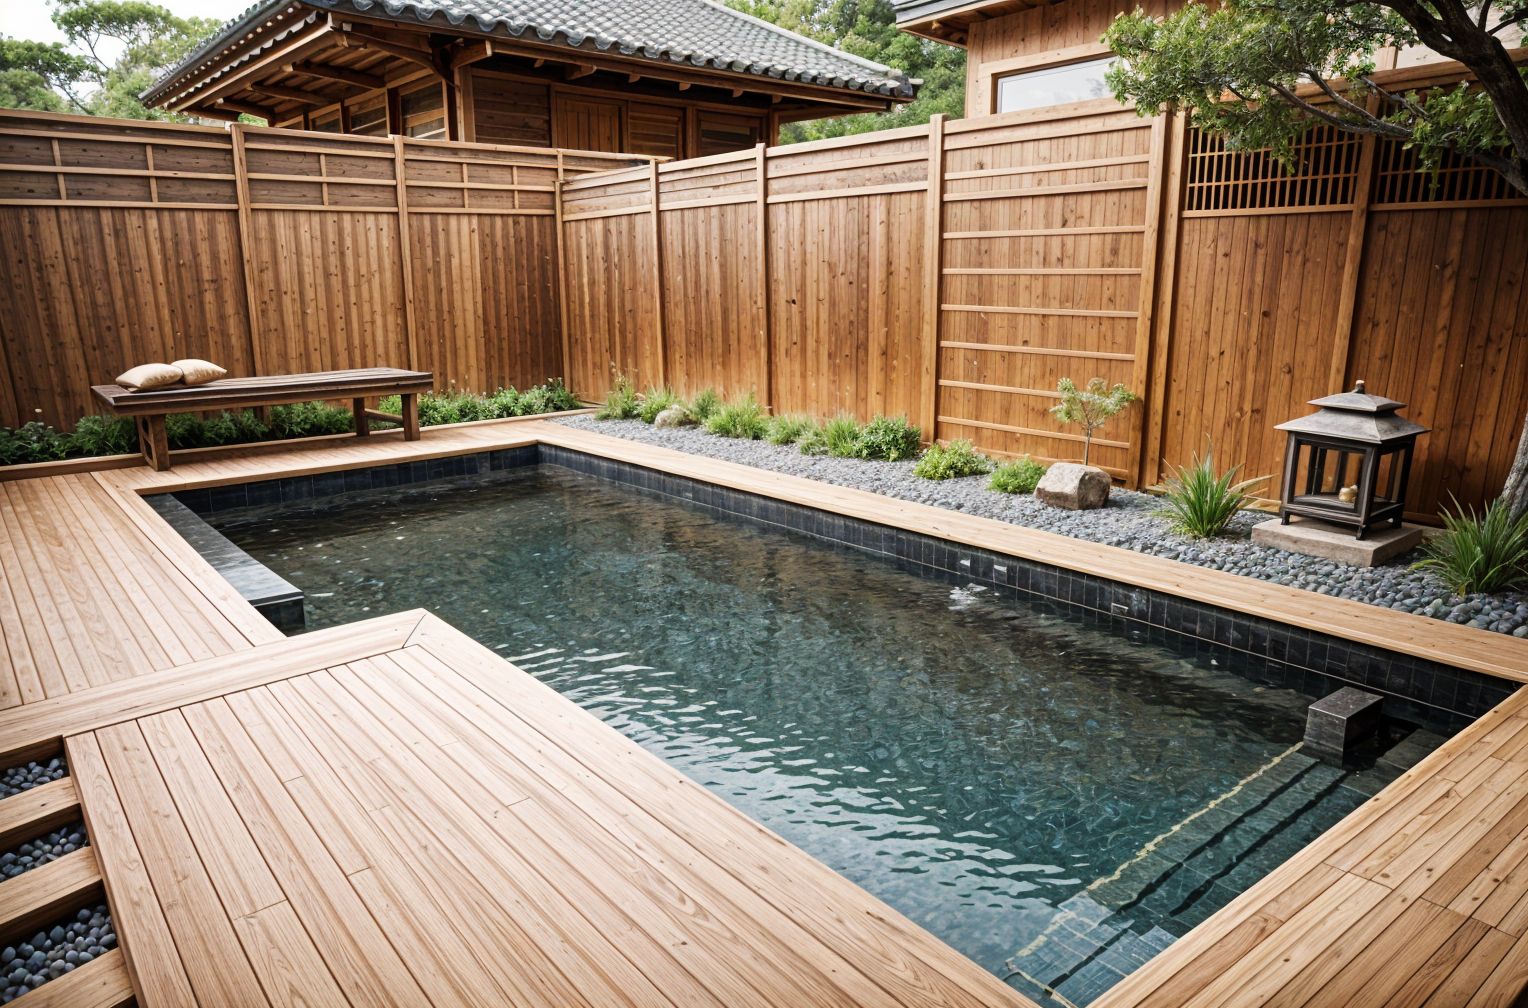 Japanese Design Outdoor Pool Area